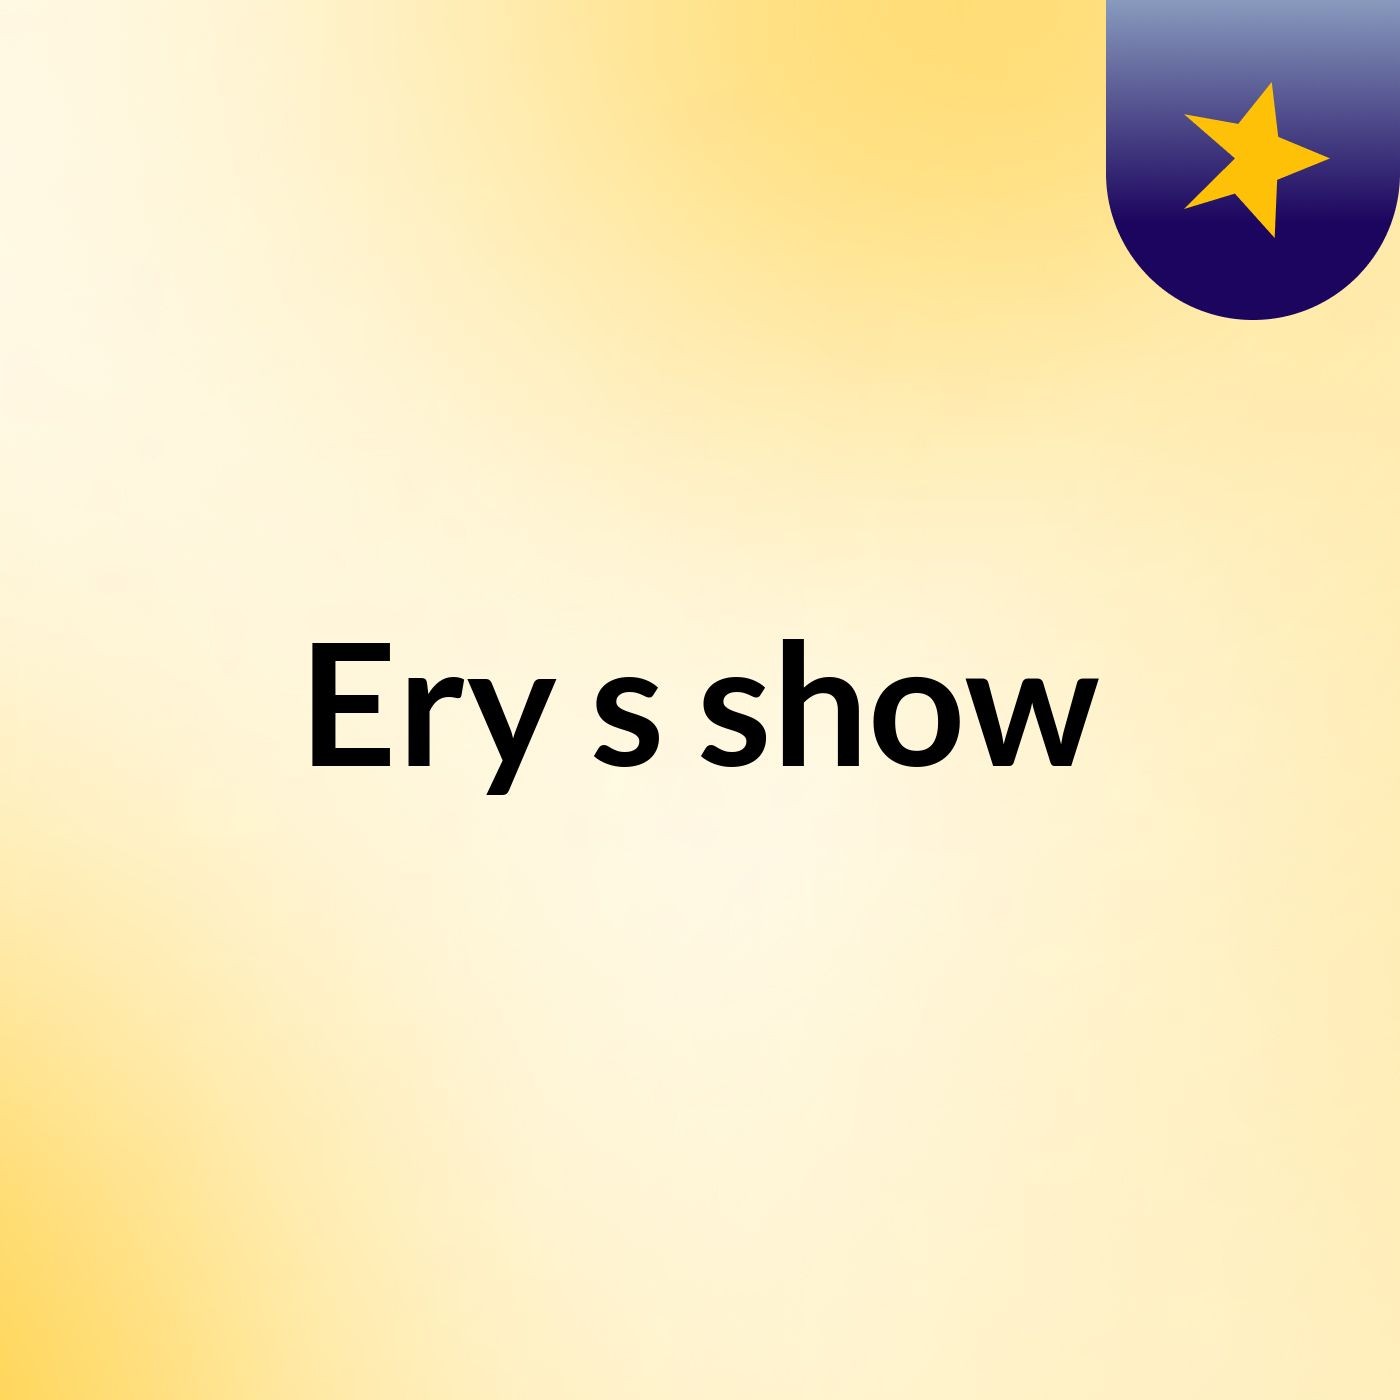 Ery's show